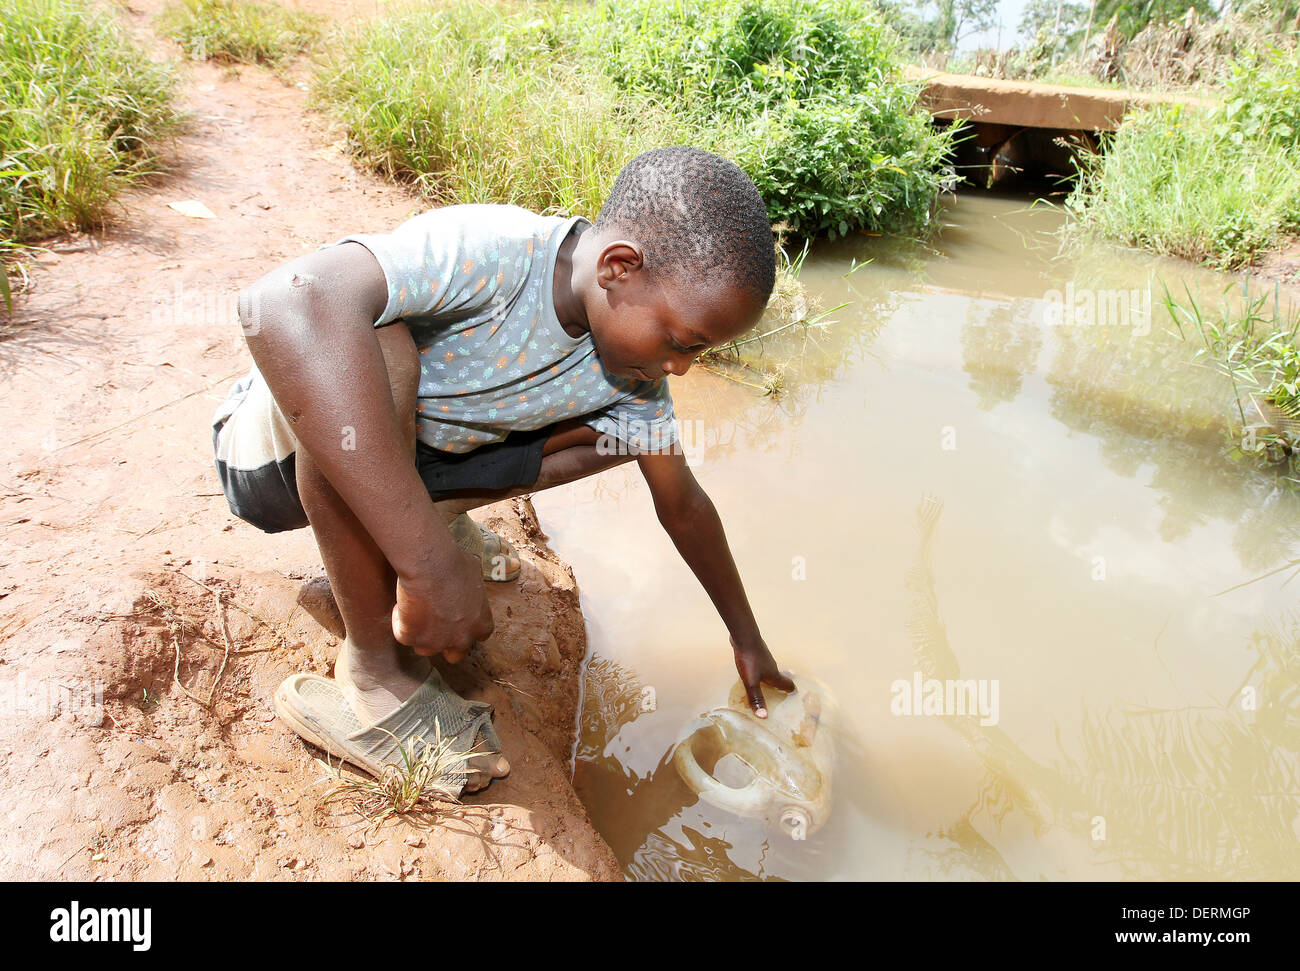 A young boy collects dirty water from a river in the Luwero district of Uganda. Stock Photo